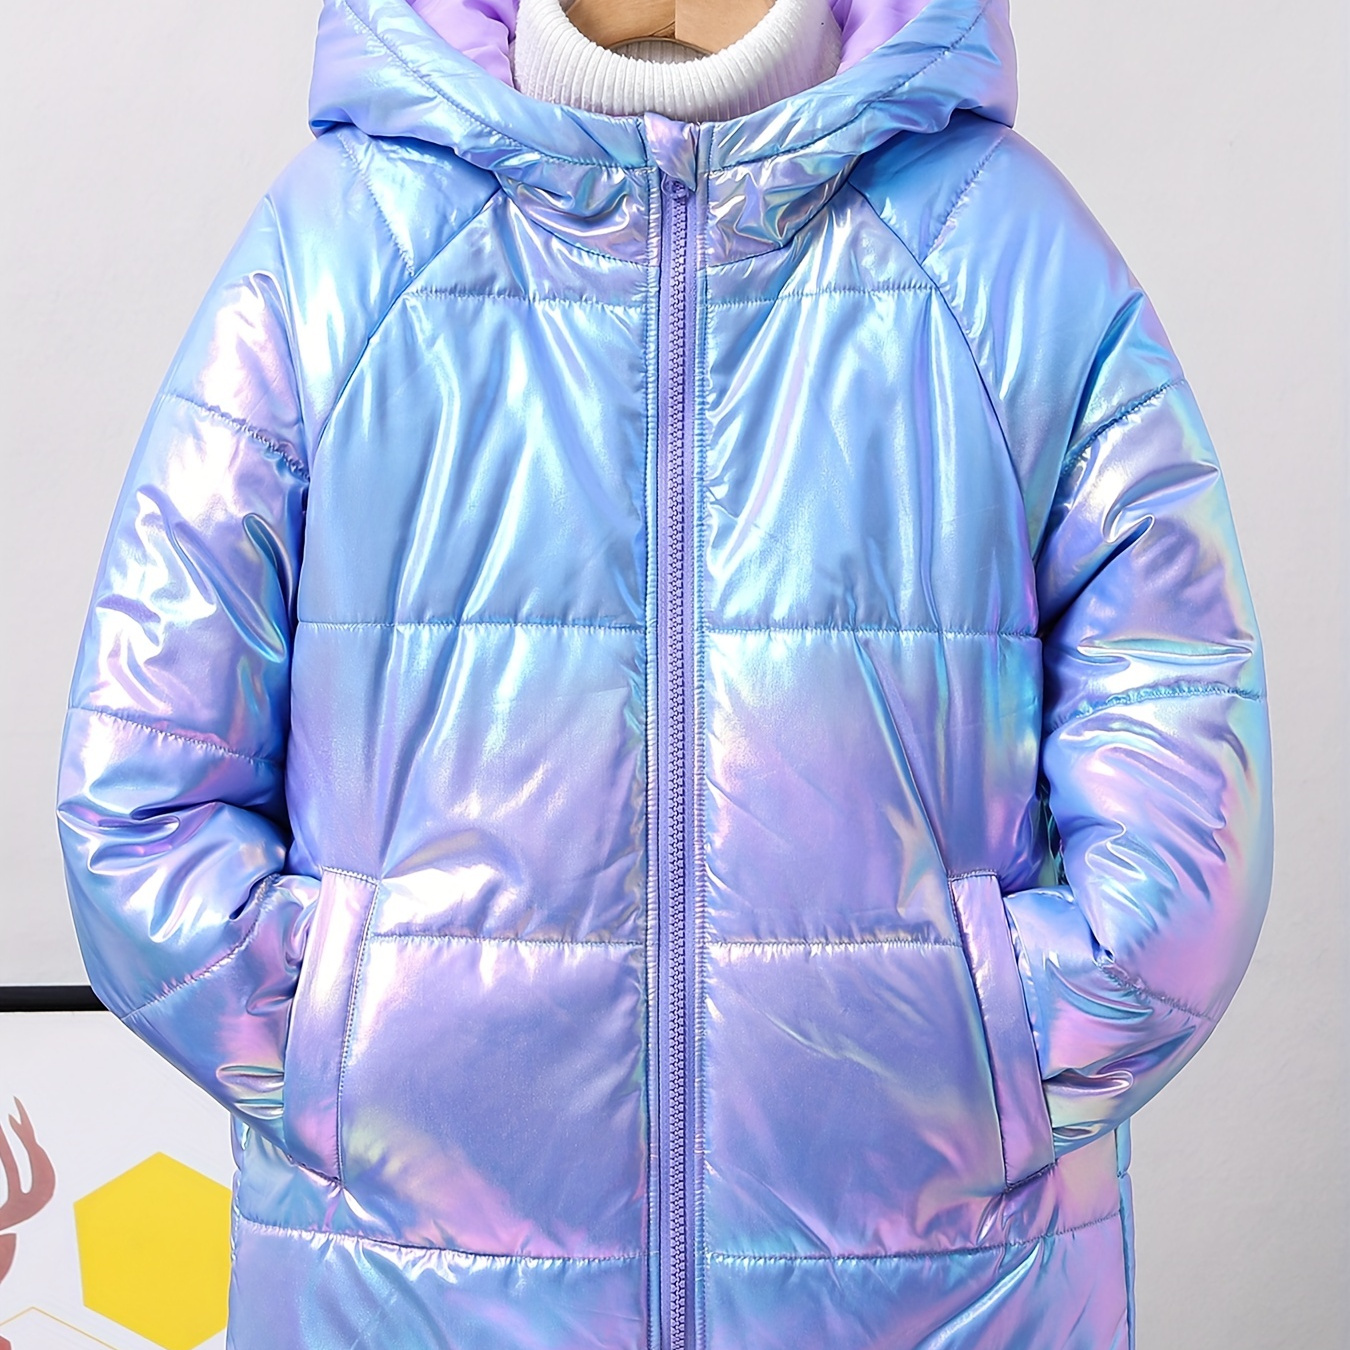 

Metallic Snow Suits For Girls, Stylish Reflective Zip Hood Alternative Puffer Long Coat With Pockets, Kids Outerwear Winter Clothes